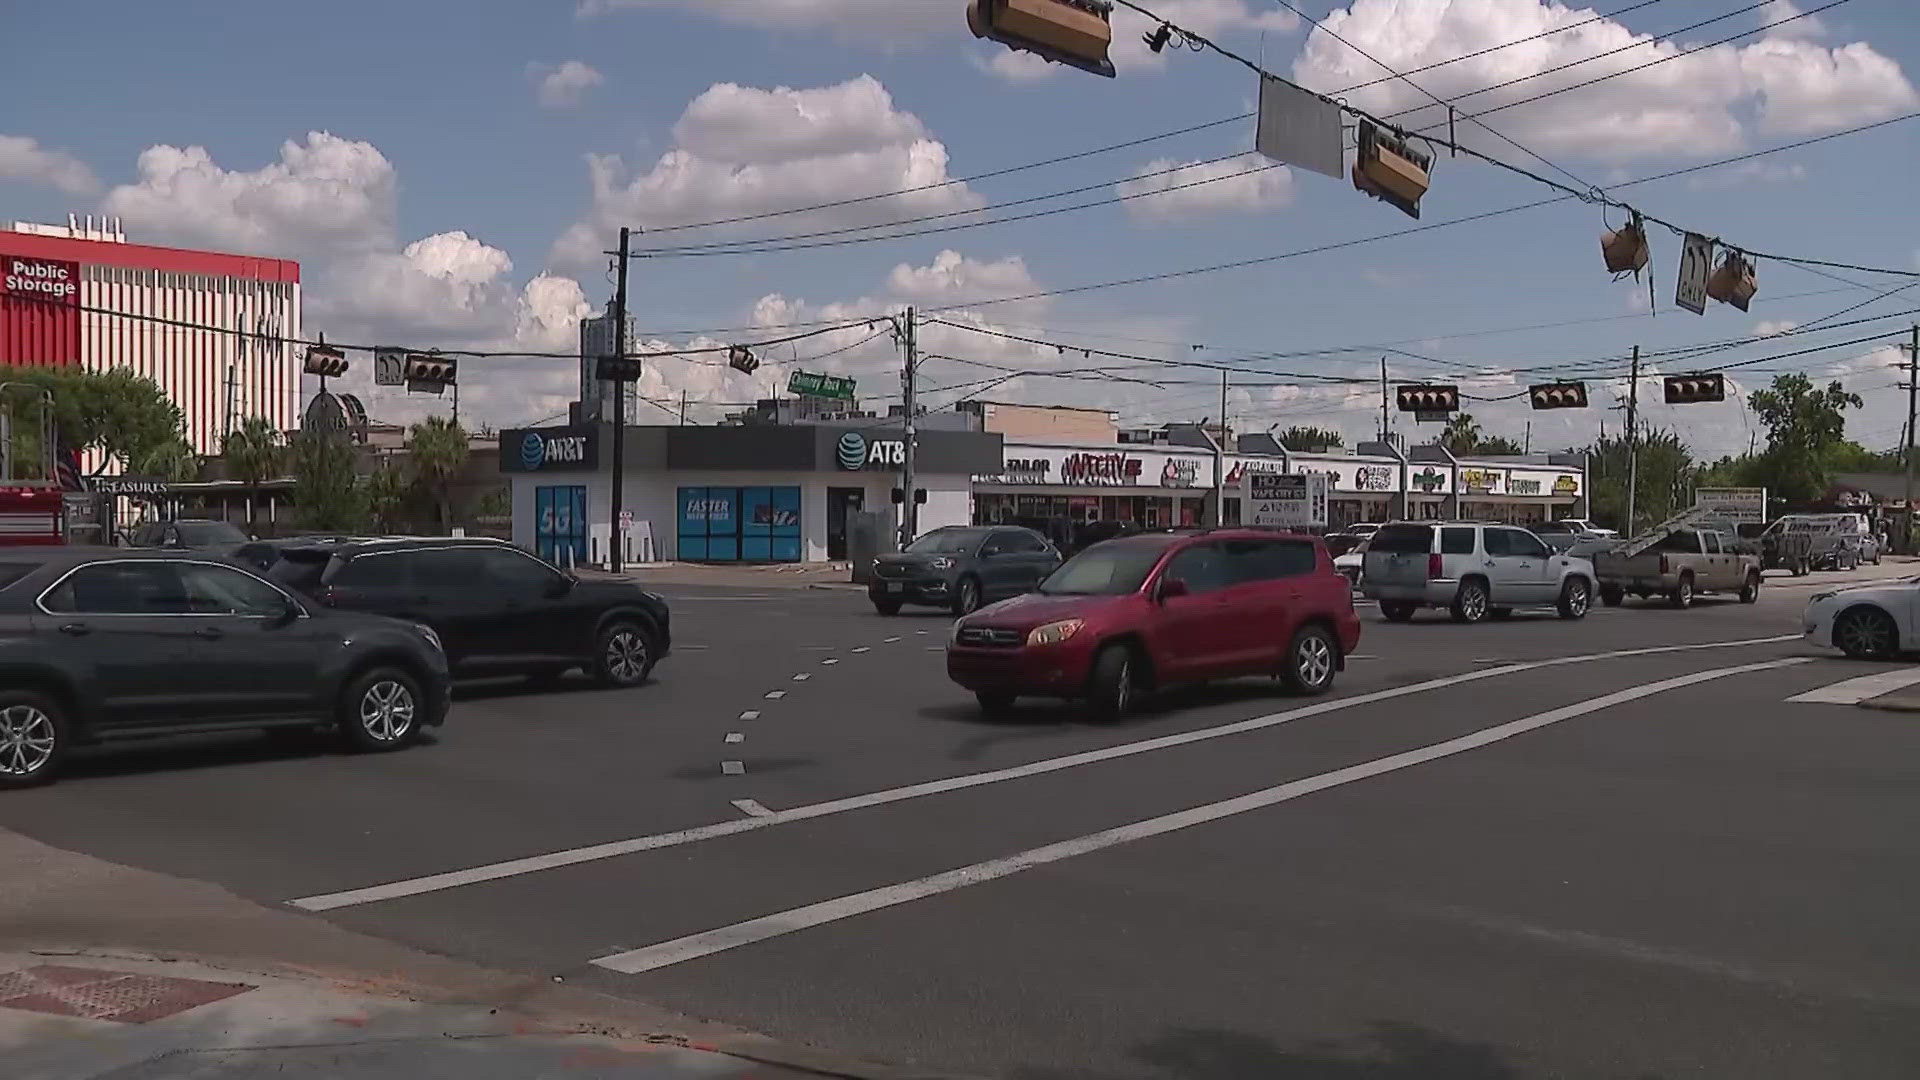 Major intersections with traffic lights out are creating confusion, chaos and crashes on the road.